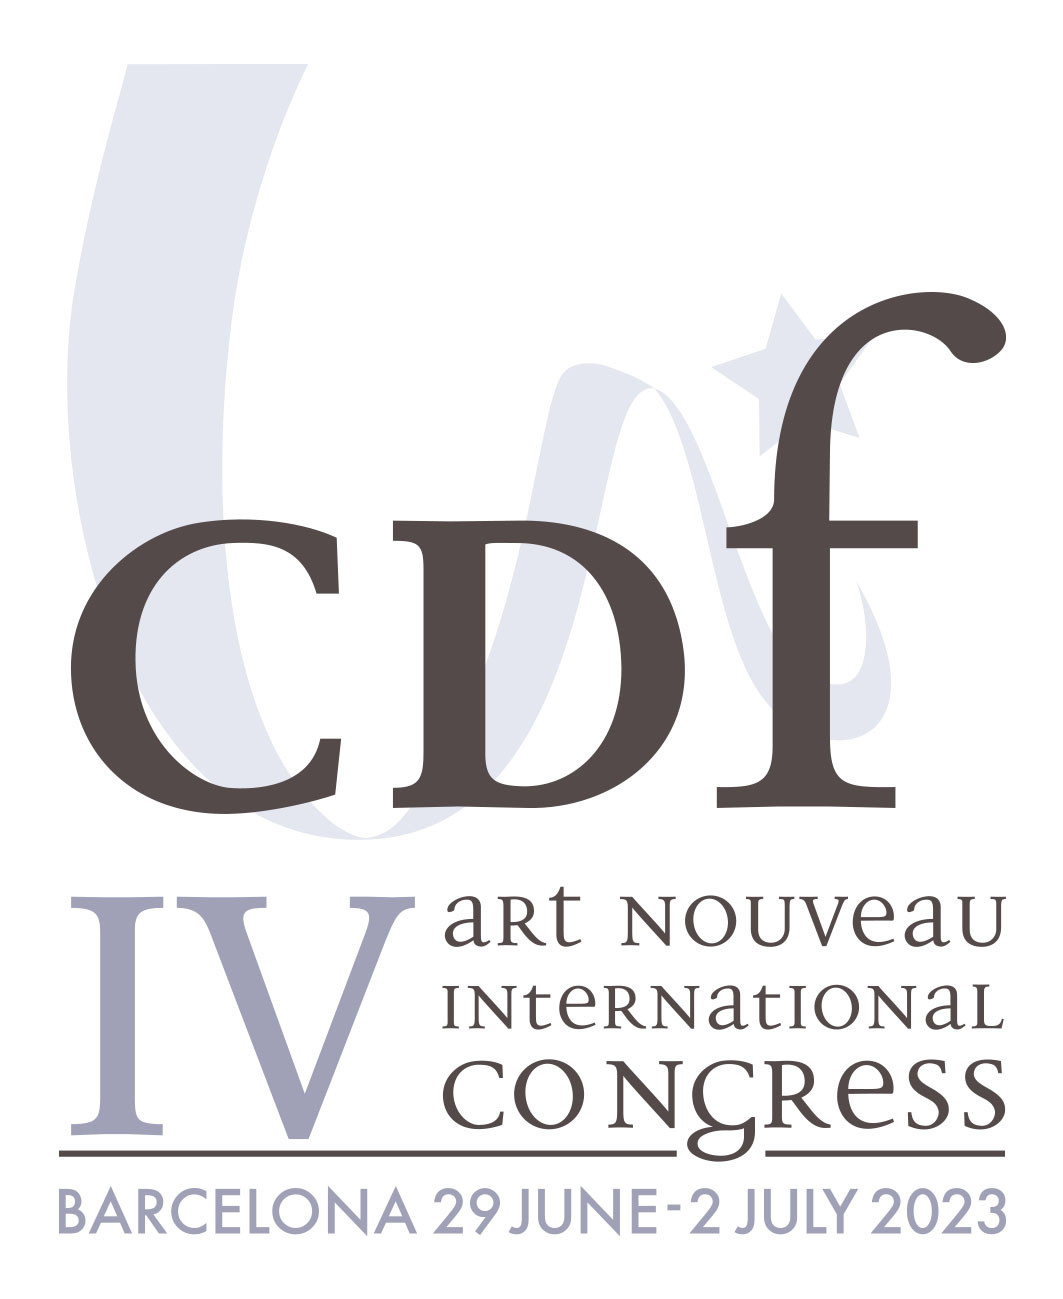 Registration to attend the IV coupDefouet International Congress